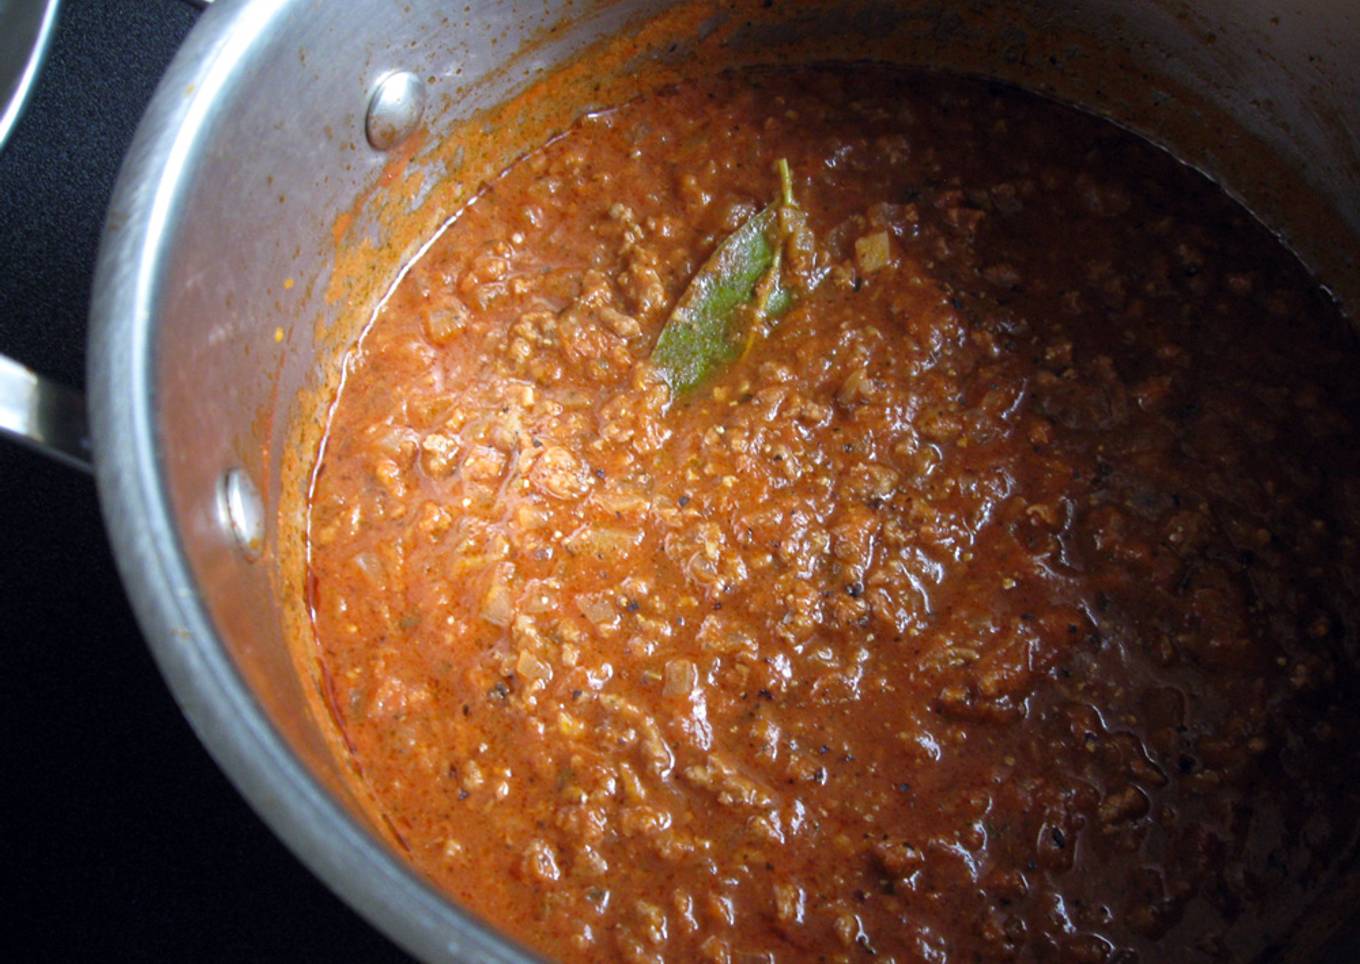 My Family’s Bolognese Sauce